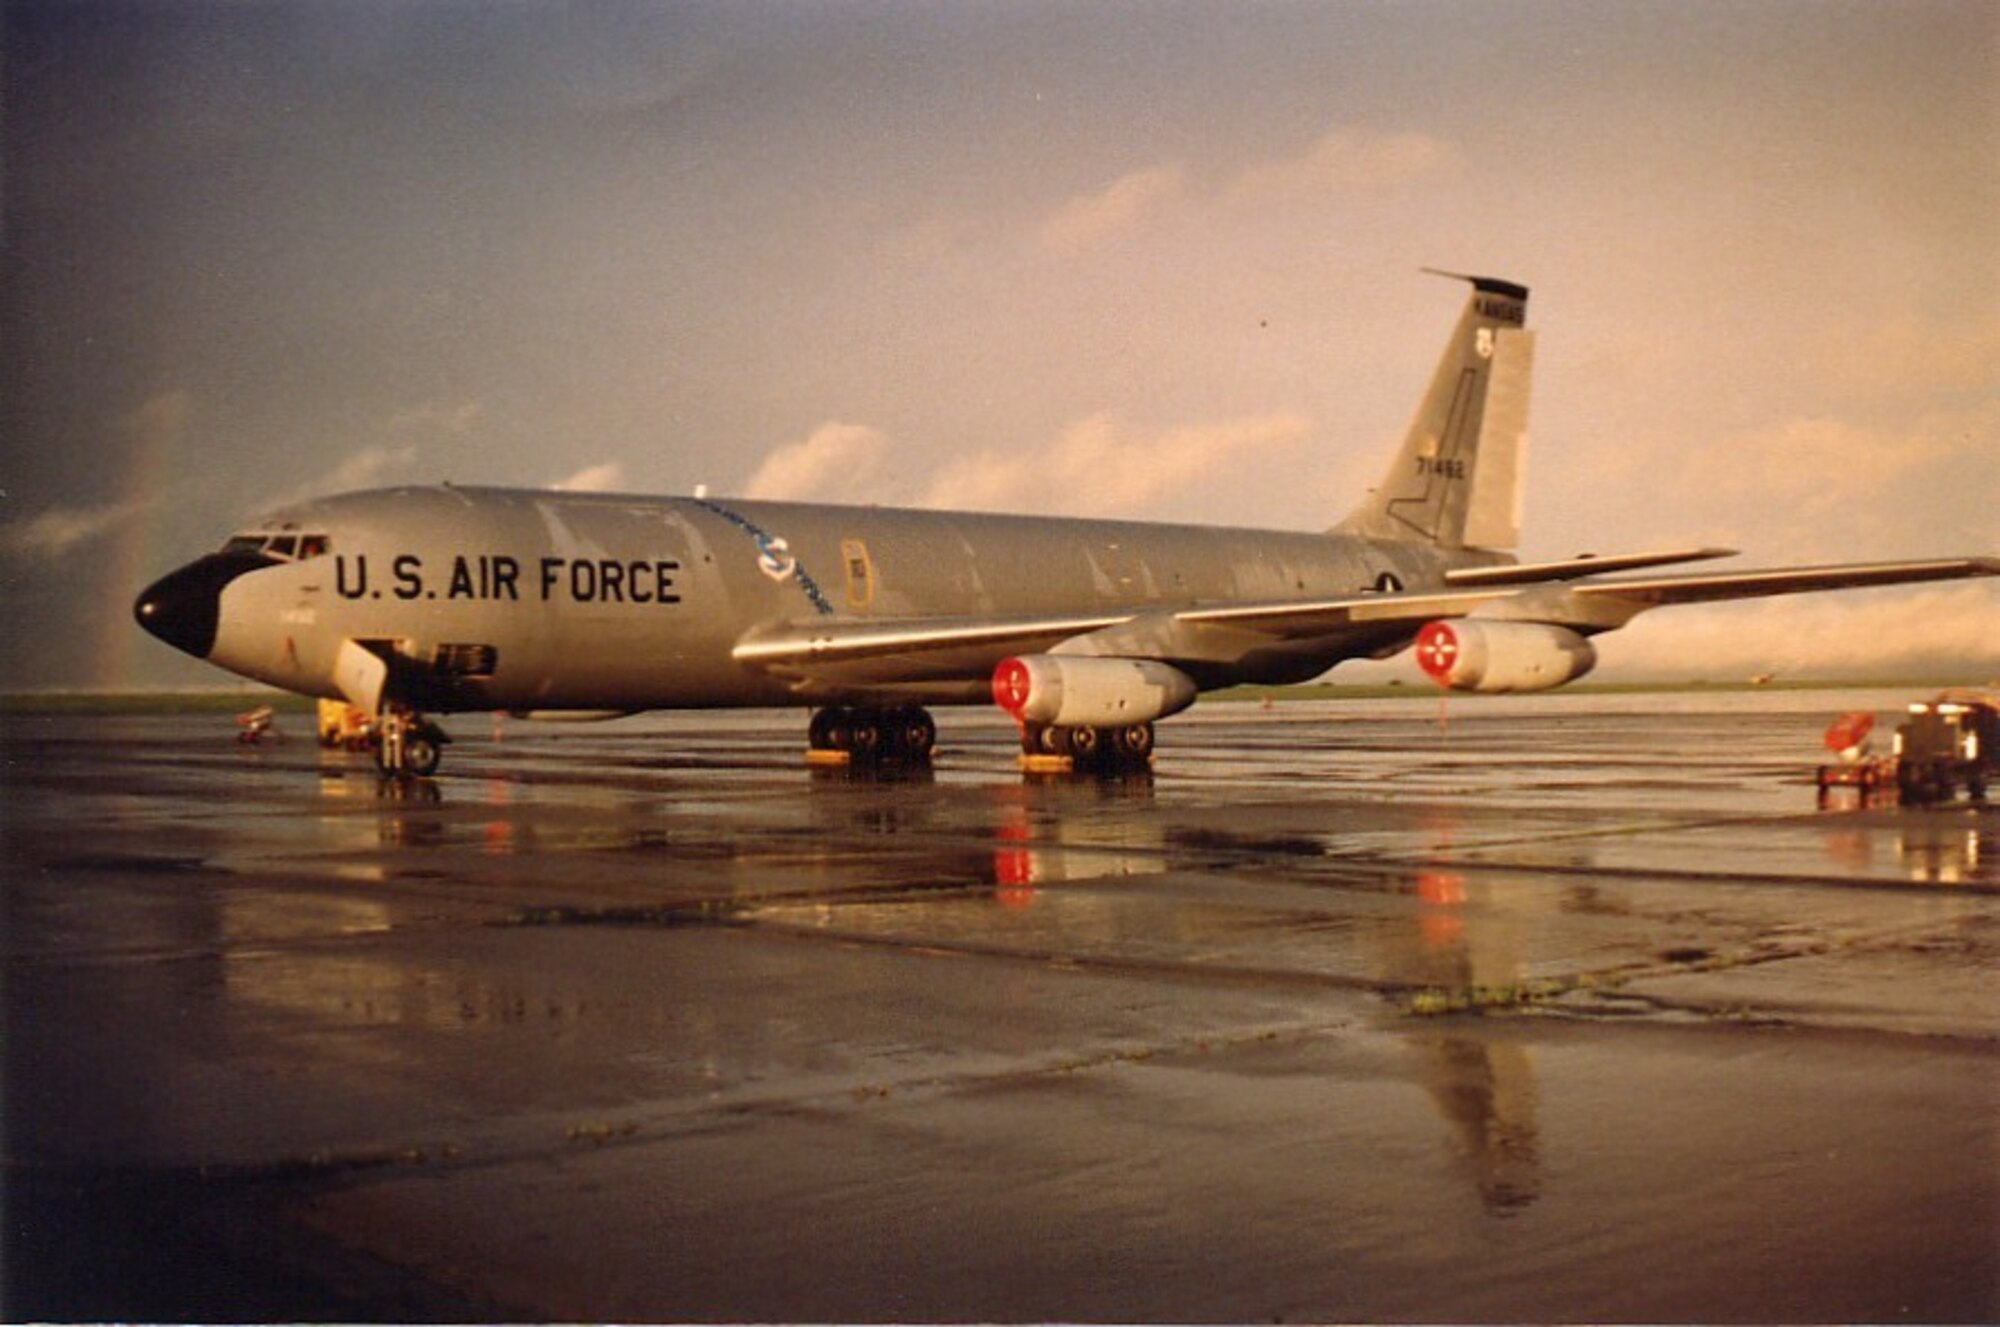 Shortly after the first KC-135s arrived at Forbes Field, this picture was captured showing #462, as an A-model, sitting on the ramp just after a summer shower had passed